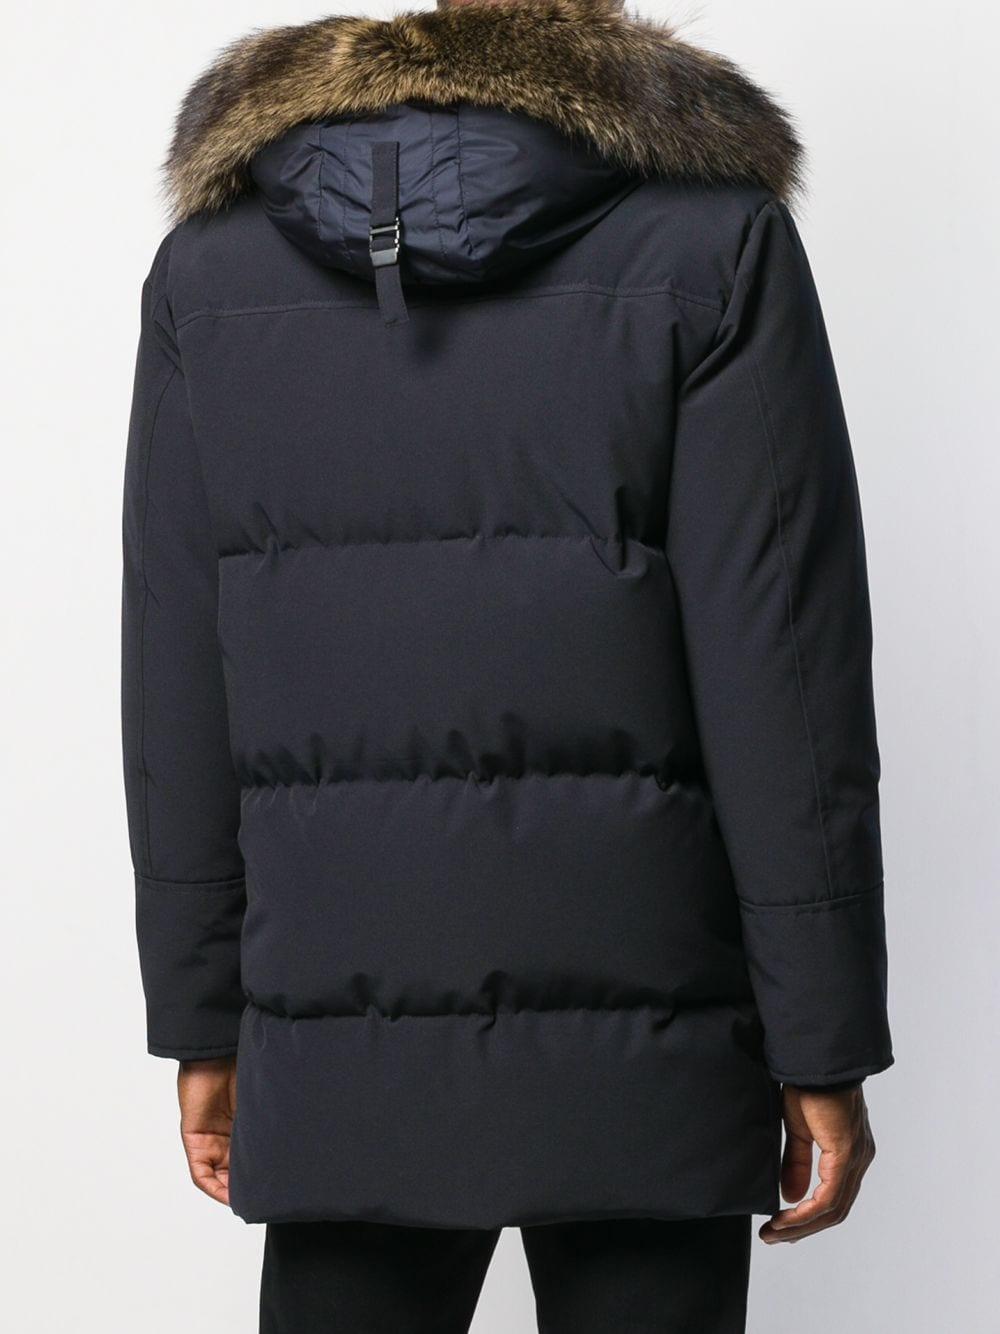 Moncler Synthetic Pola Parka Coat in Blue for Men | Lyst Canada